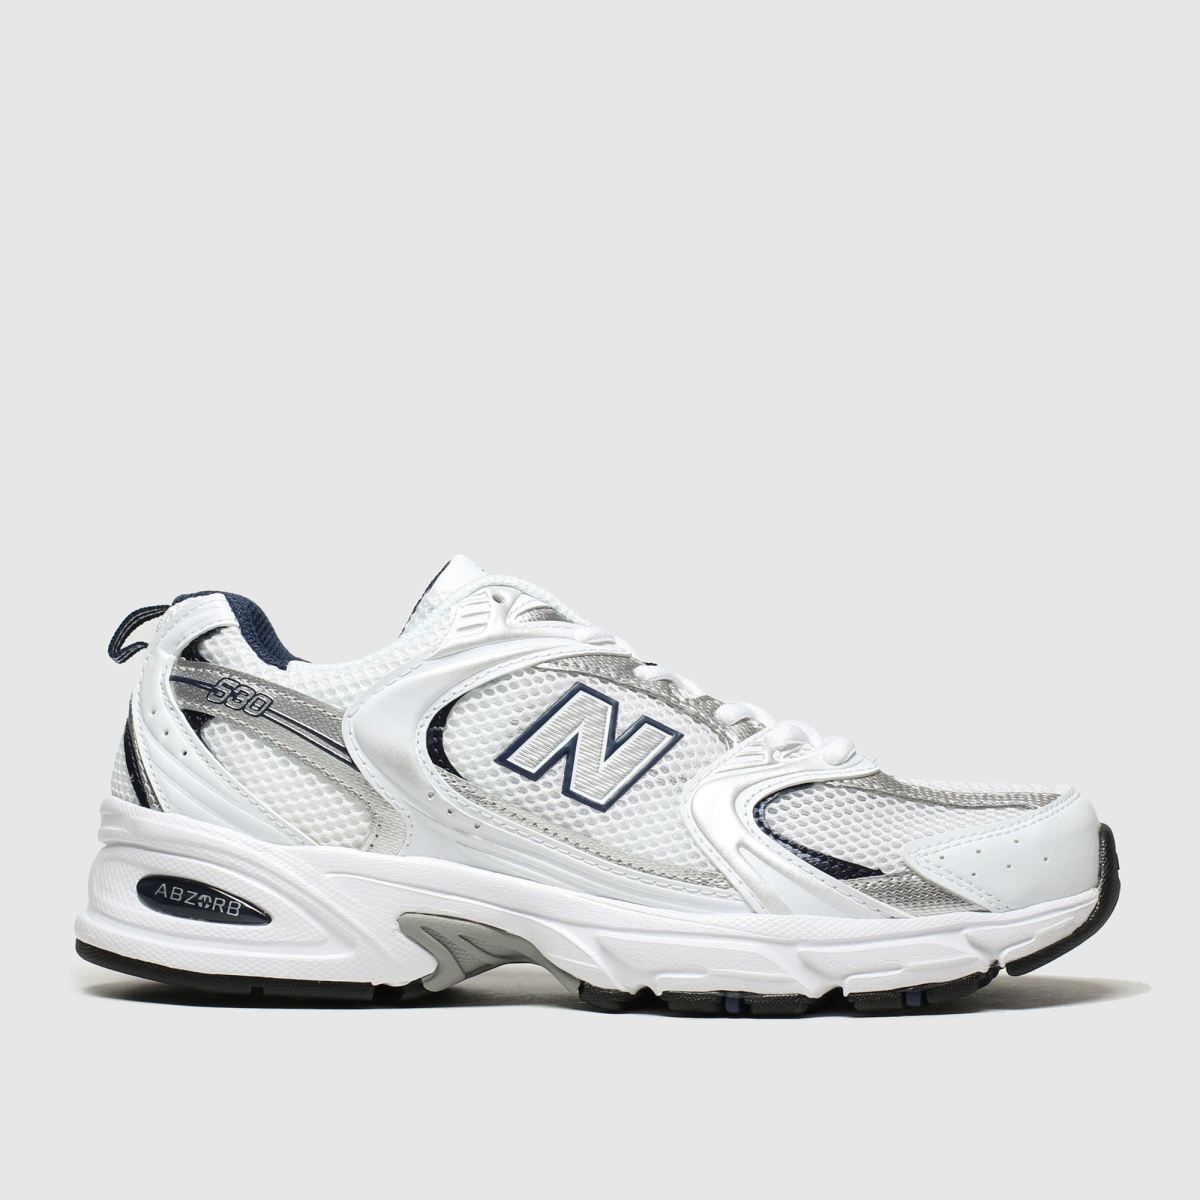 New balance white & silver 530 trainers | Schuh